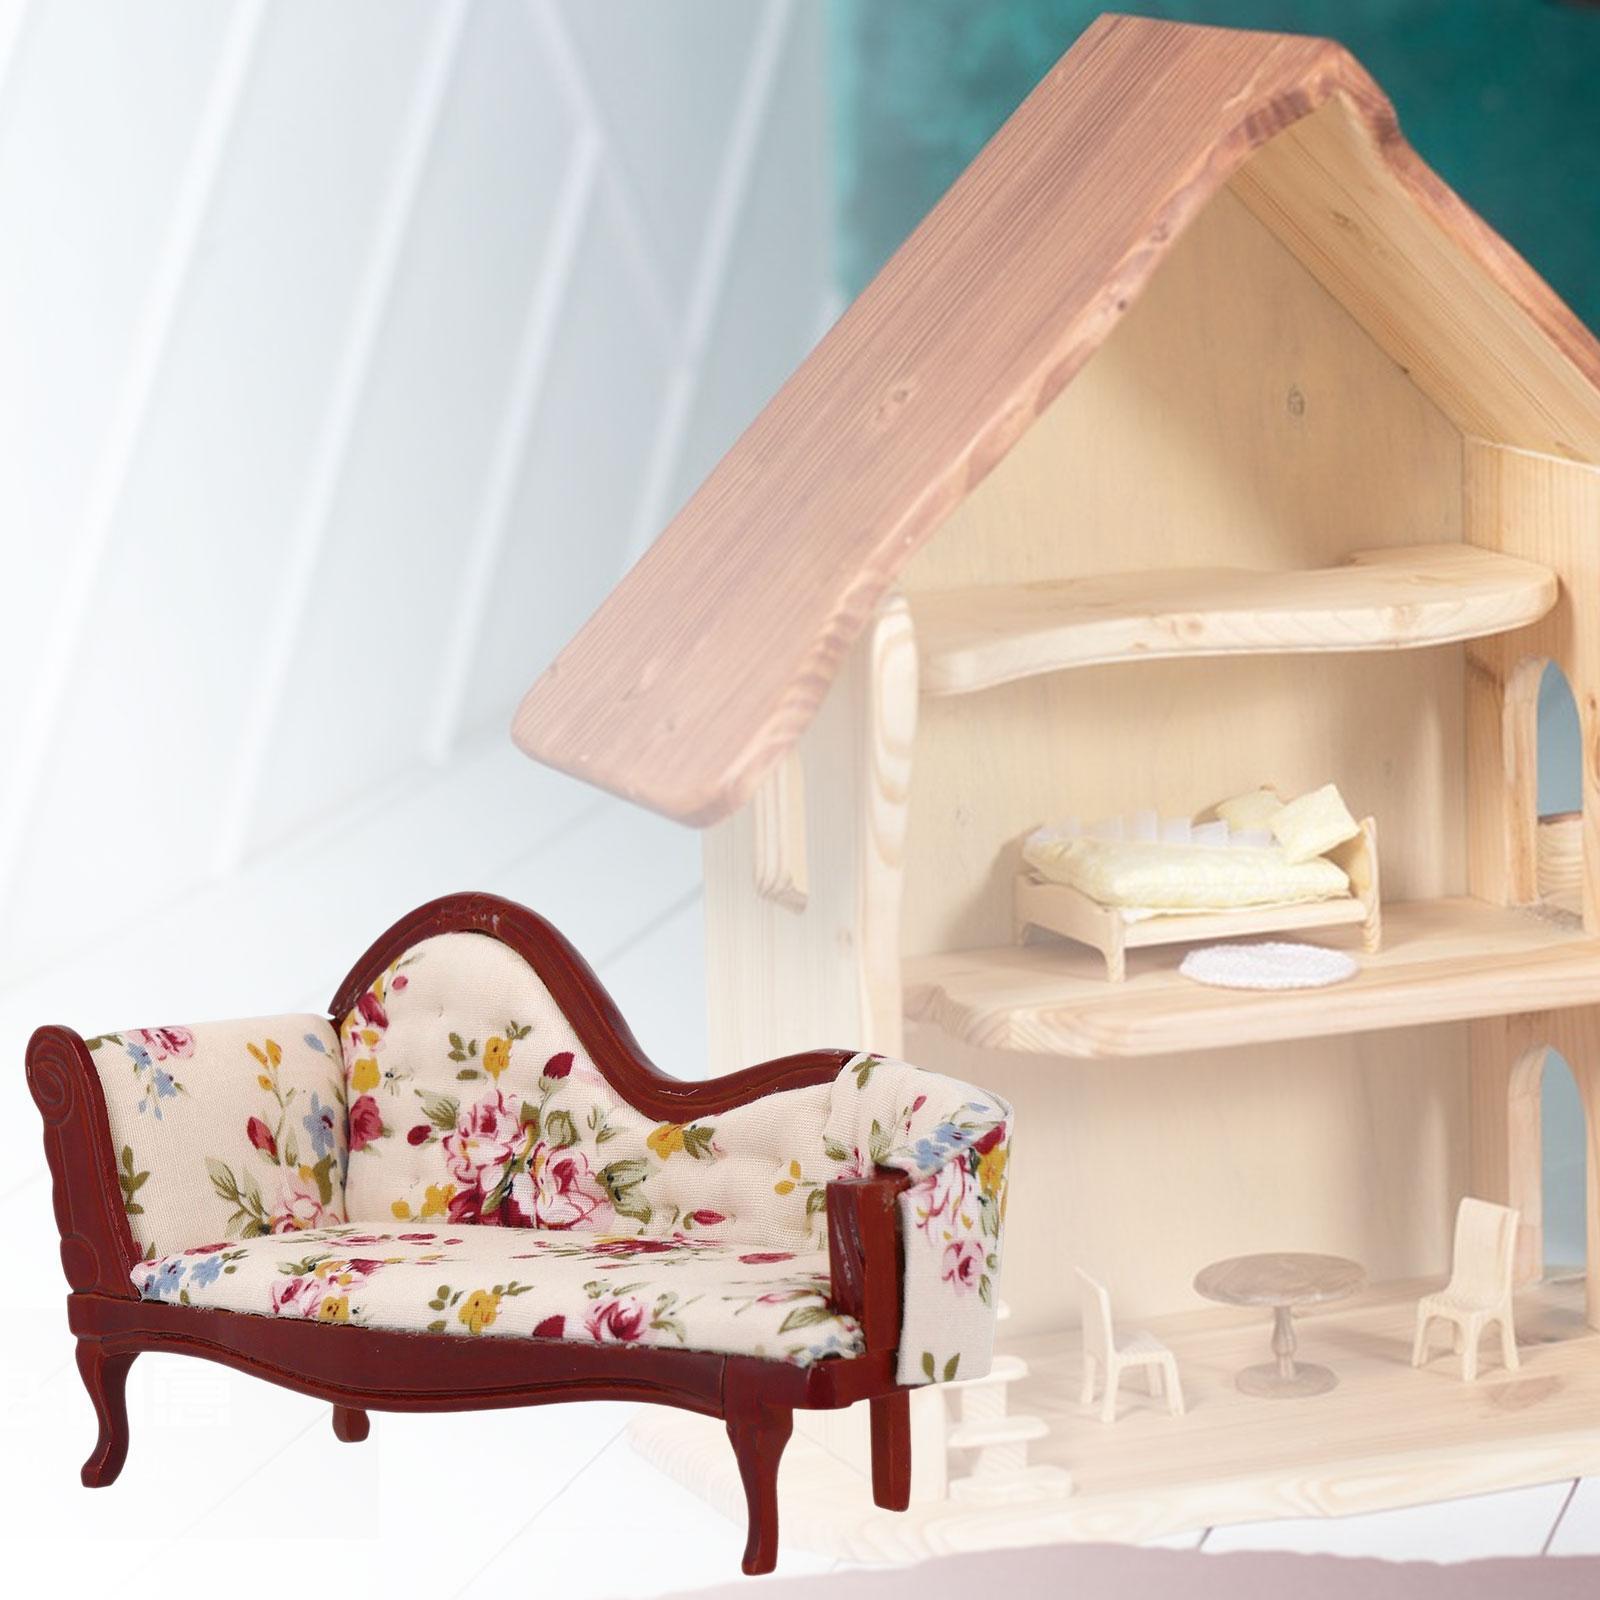 Miniature Doll House Sofa Stool Chair ,Accessory Furniture Model Toys, Simulation 1:12 for Doll Living Room Home Outdoor Ornaments